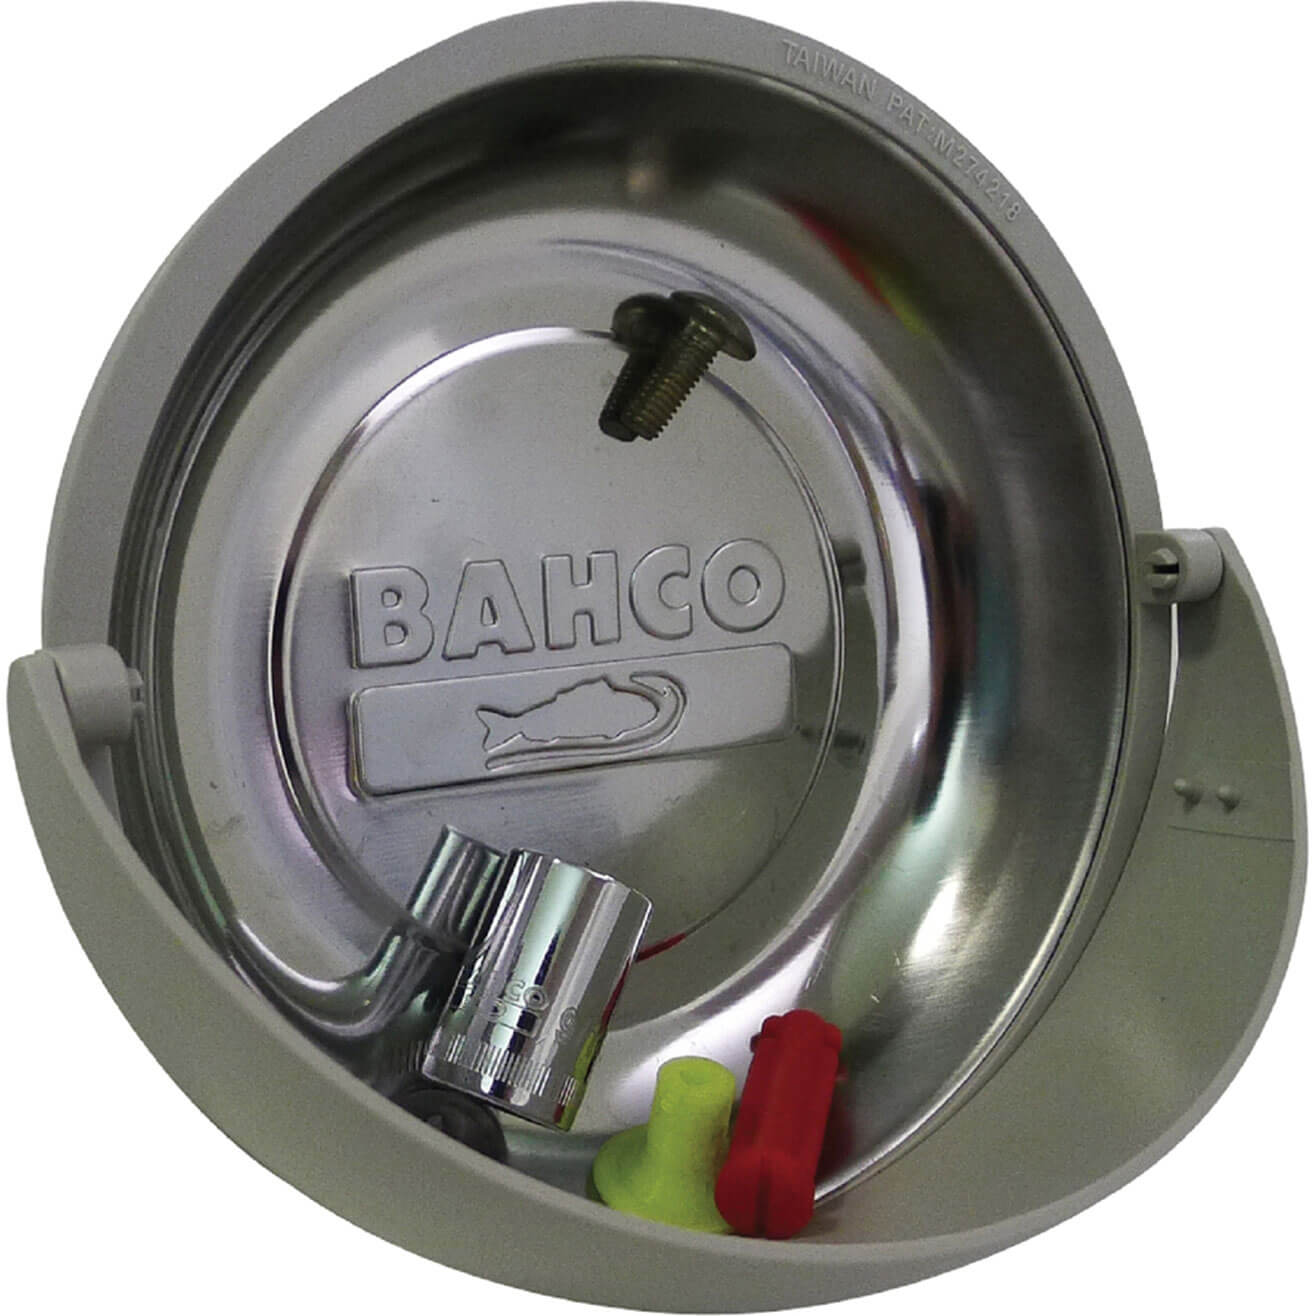 Photo of Bahco Stainless Steel Magnetic Circular Parts Tray